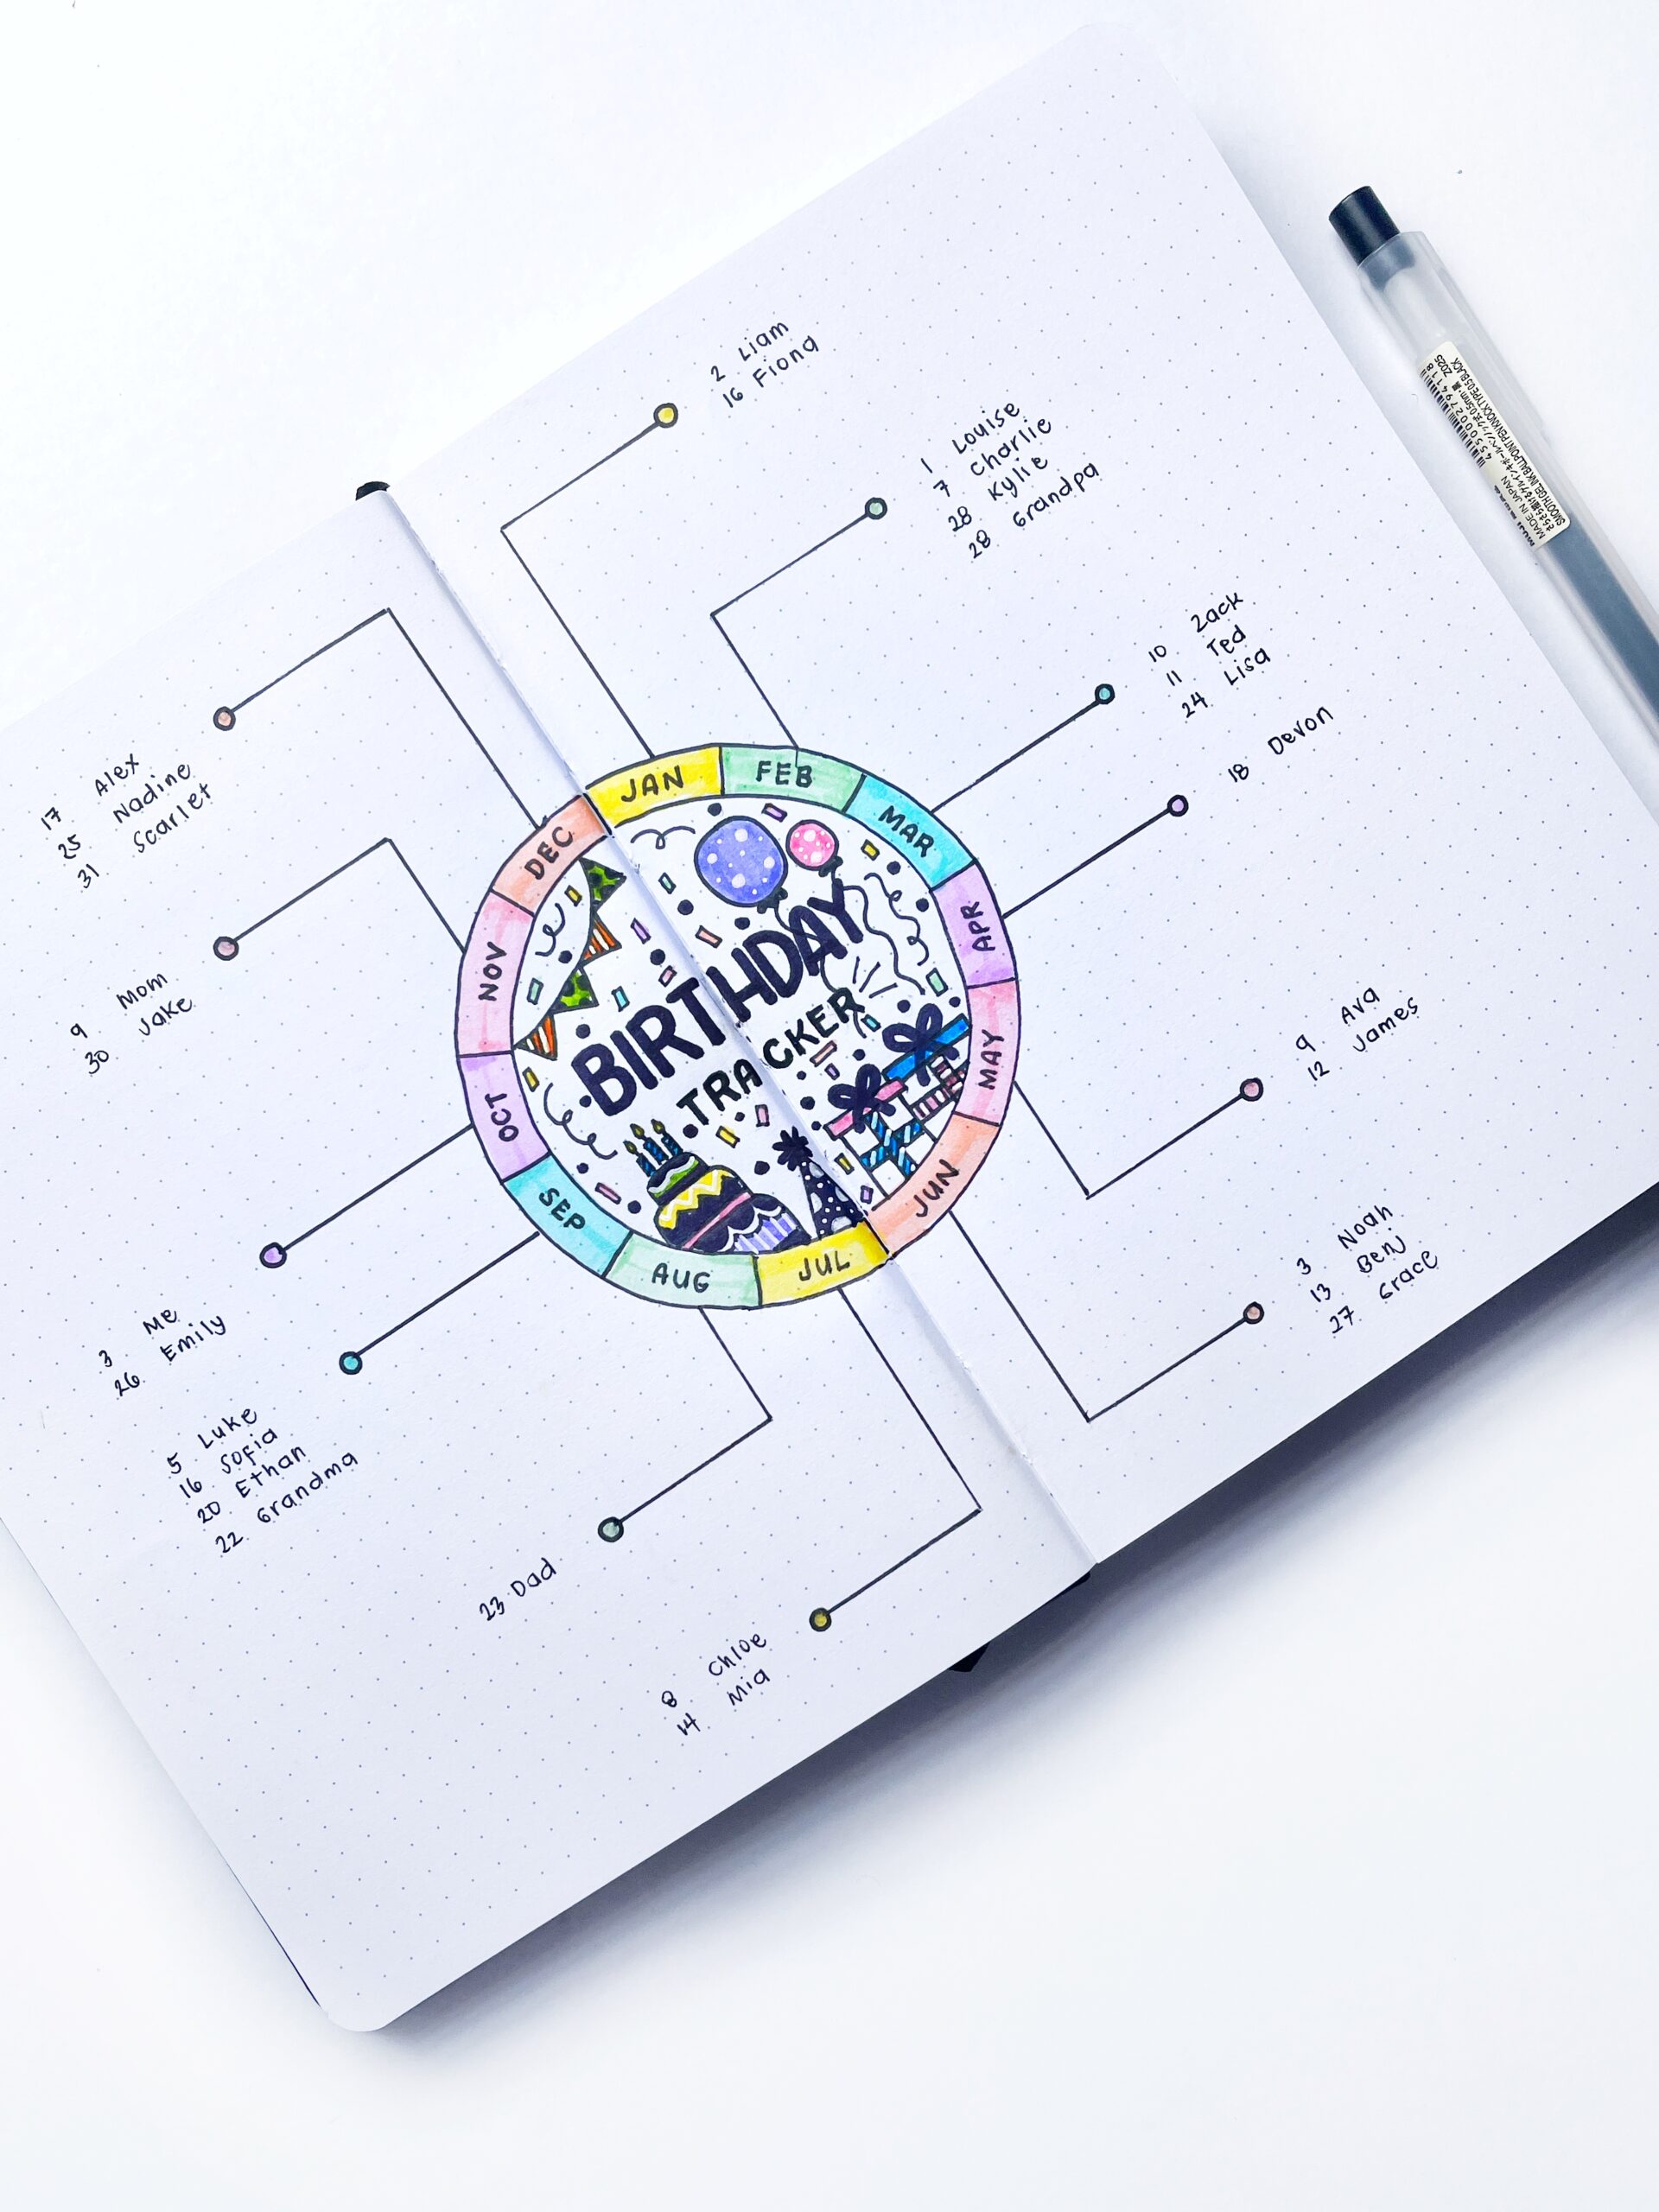 The birthday tracker layout with birthdays and celebrants’ names added to it.